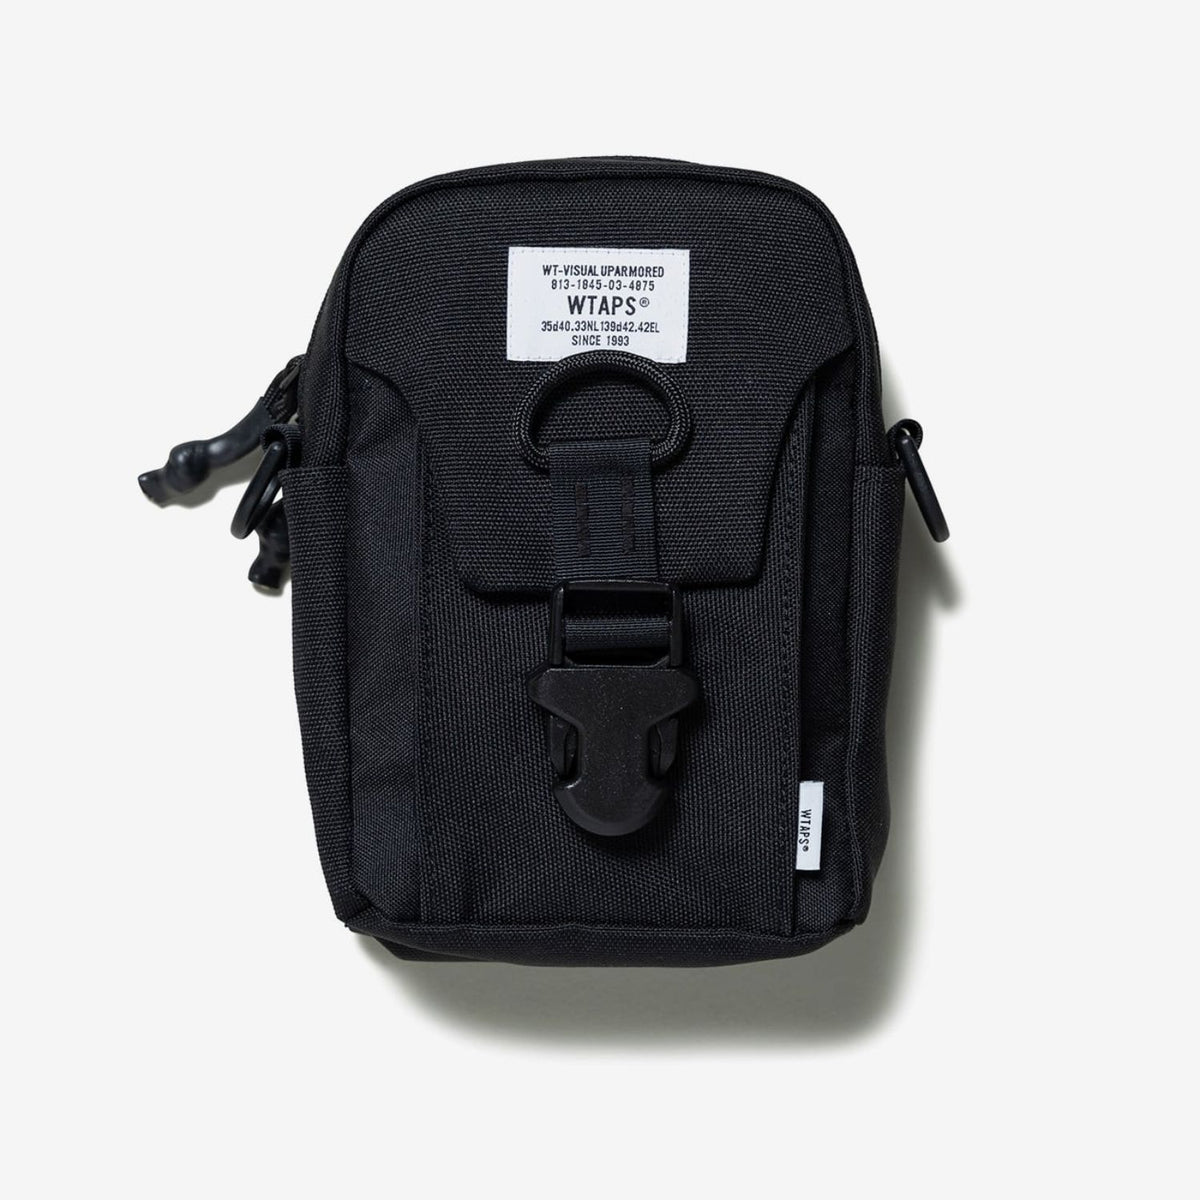 WTAPS RECONNAISSANCE POUCH ポーチ　ダブルタップス